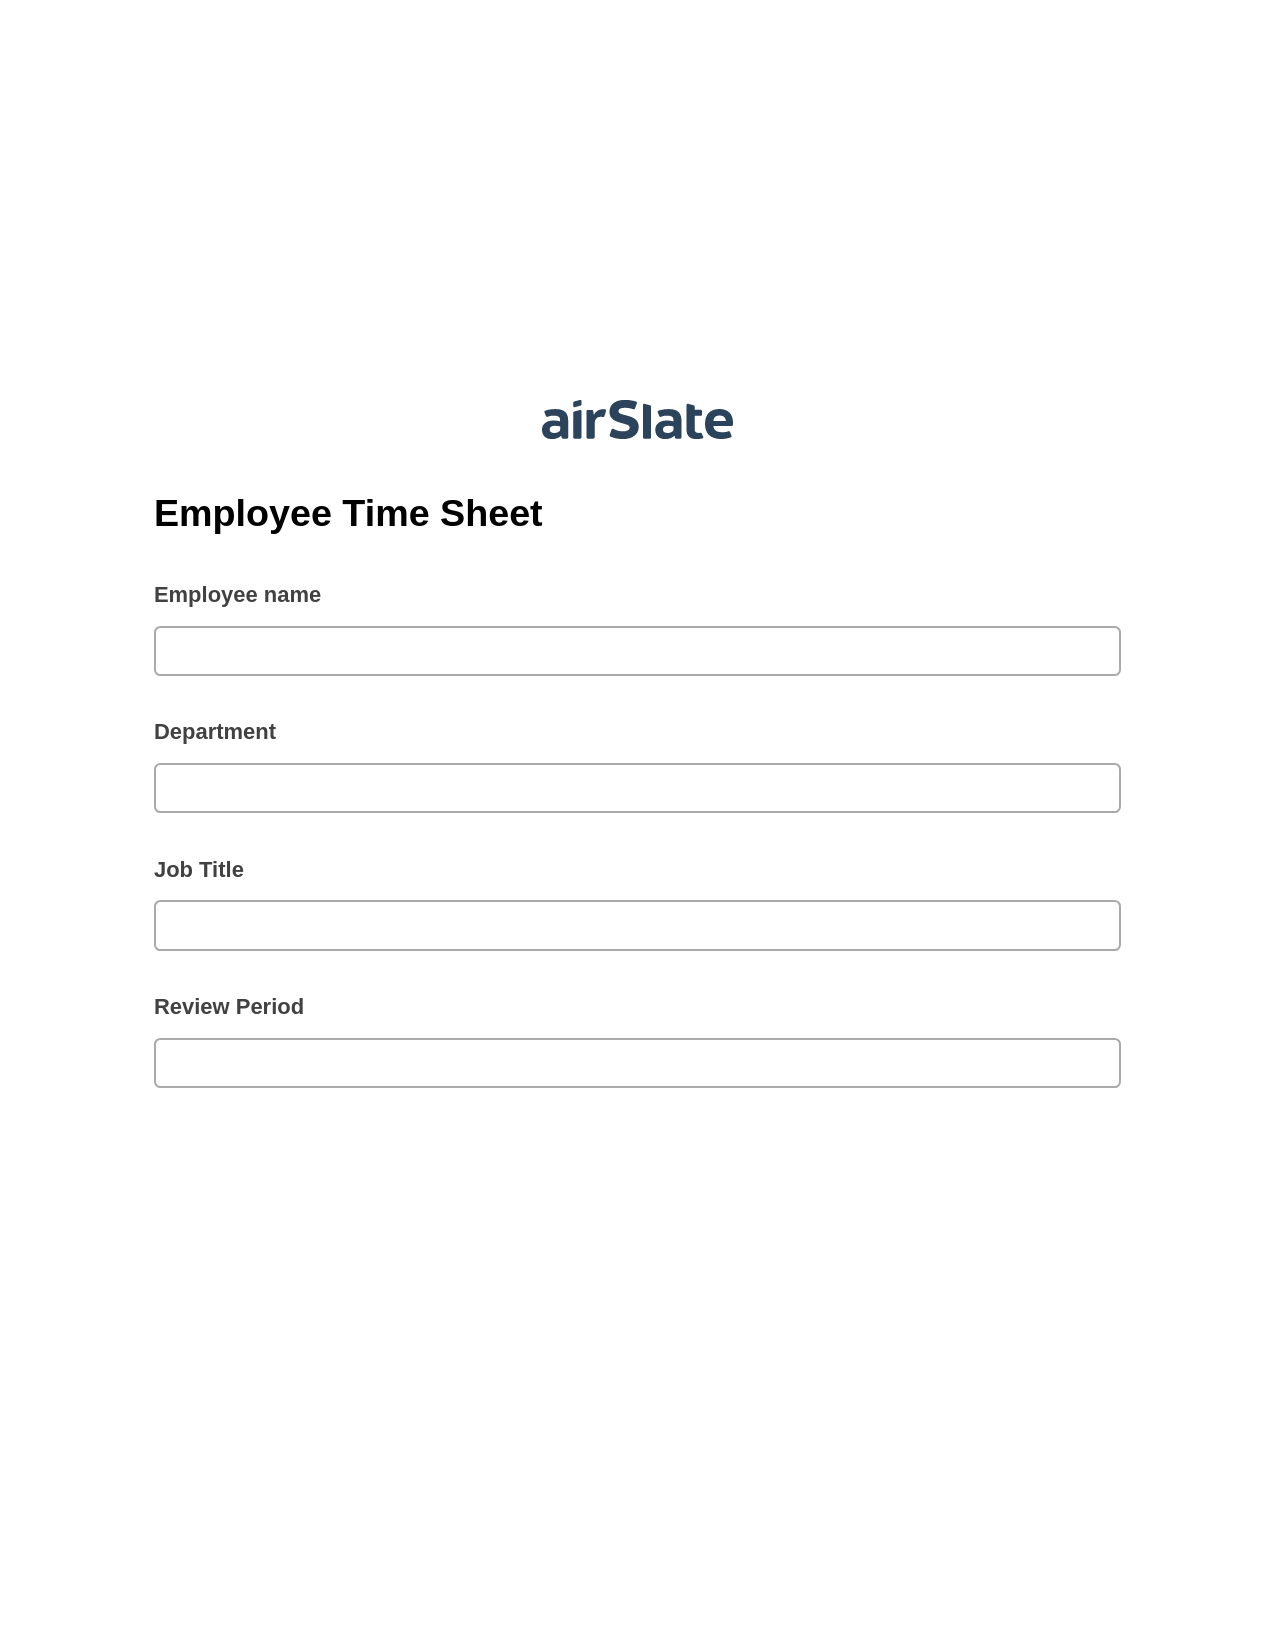 Multirole Employee Time Sheet Pre-fill Document Bot, Create Salesforce Records Bot, Archive to Dropbox Bot